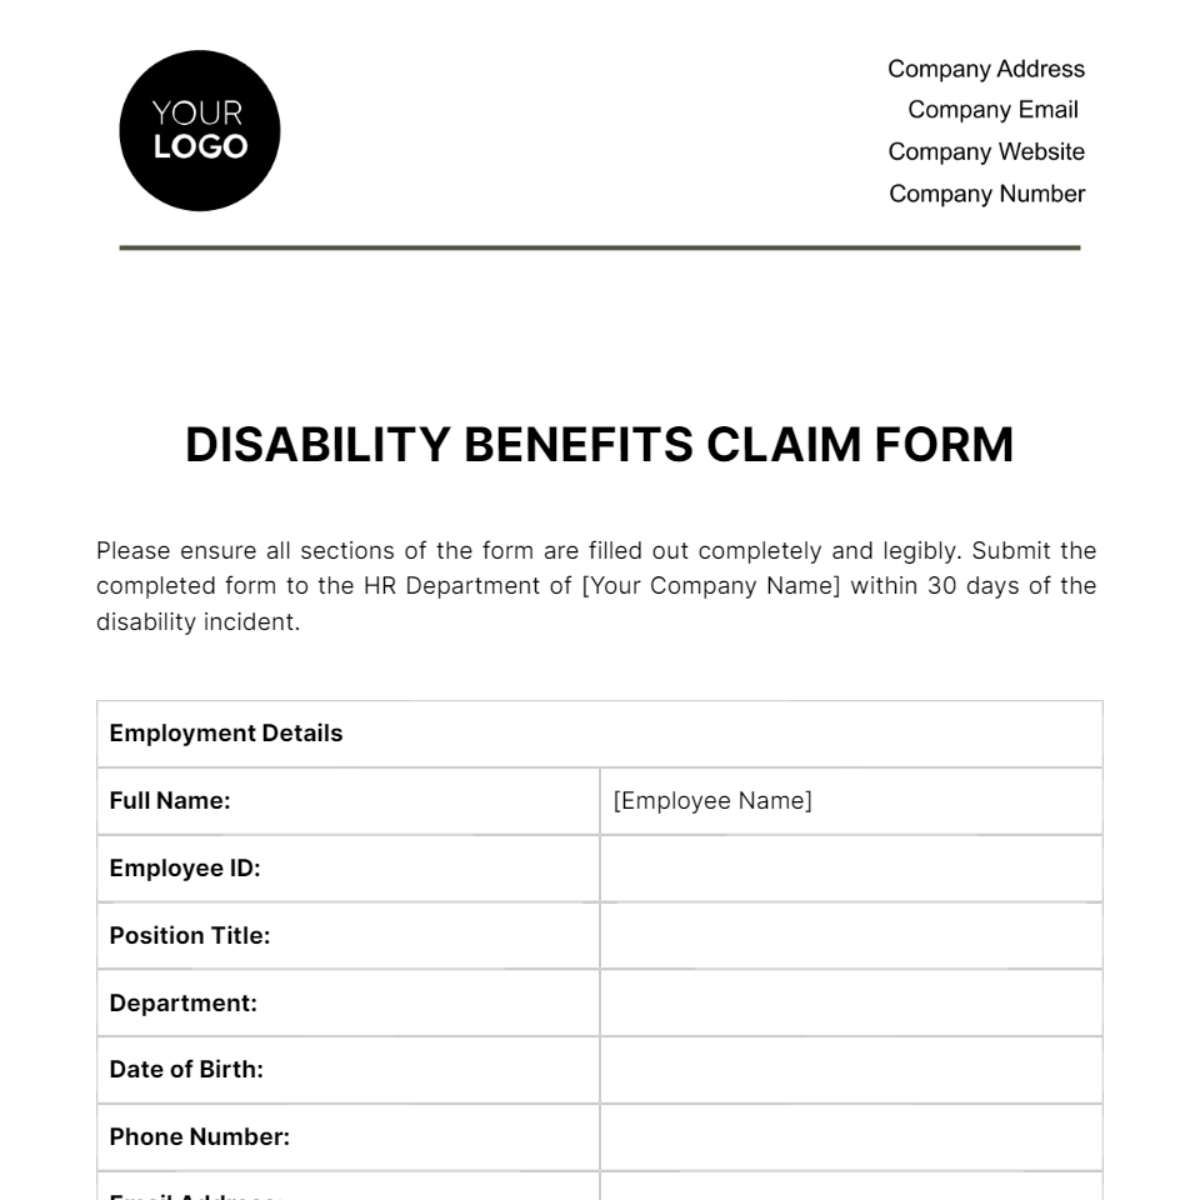 Disability Benefits Claim Form HR Template